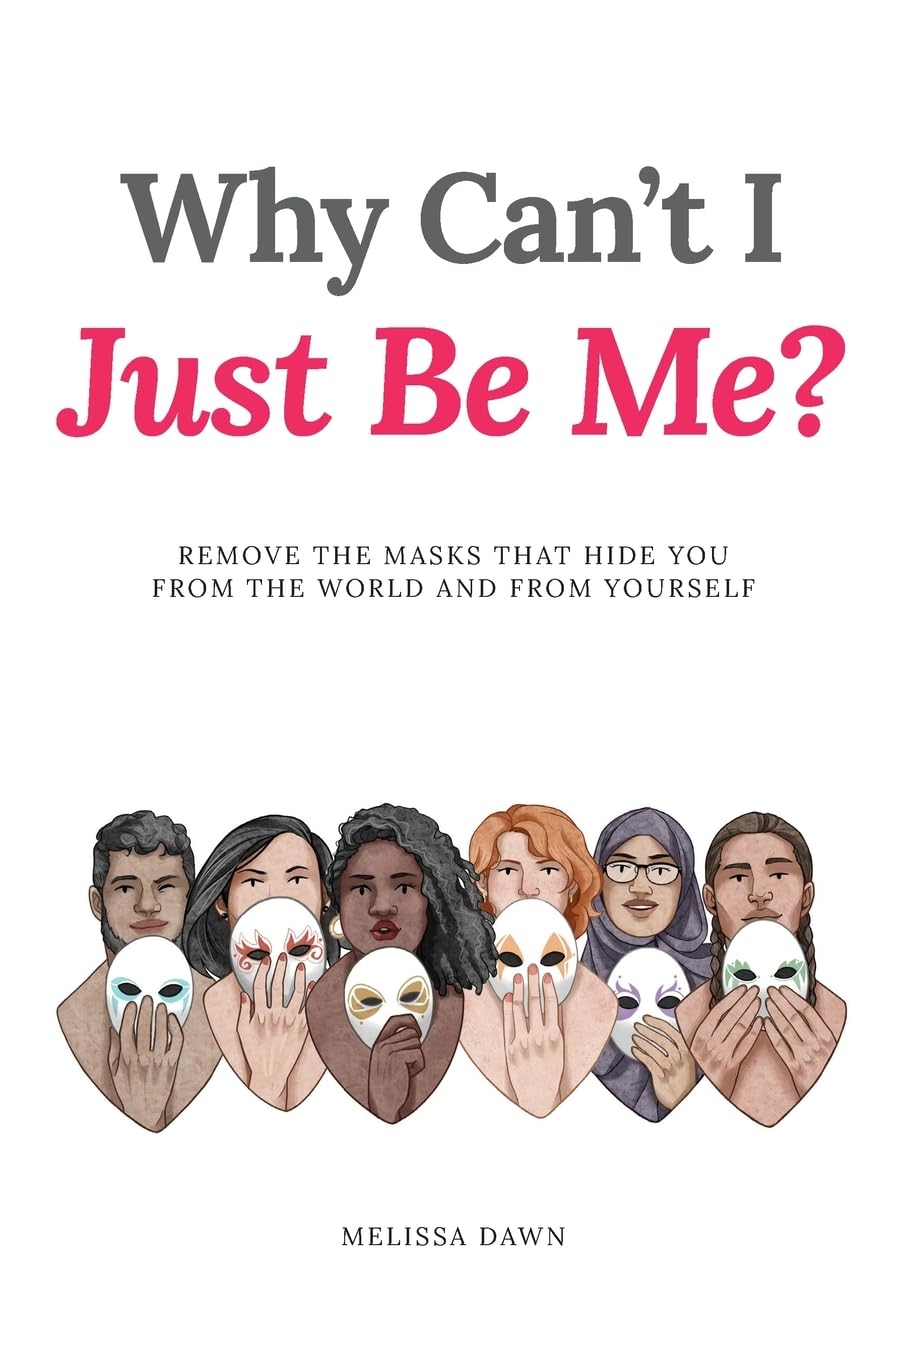 Why Can't I Just Be Me - Remove the Masks that Hide You from the World and from Yourself - SureShot Books Publishing LLC